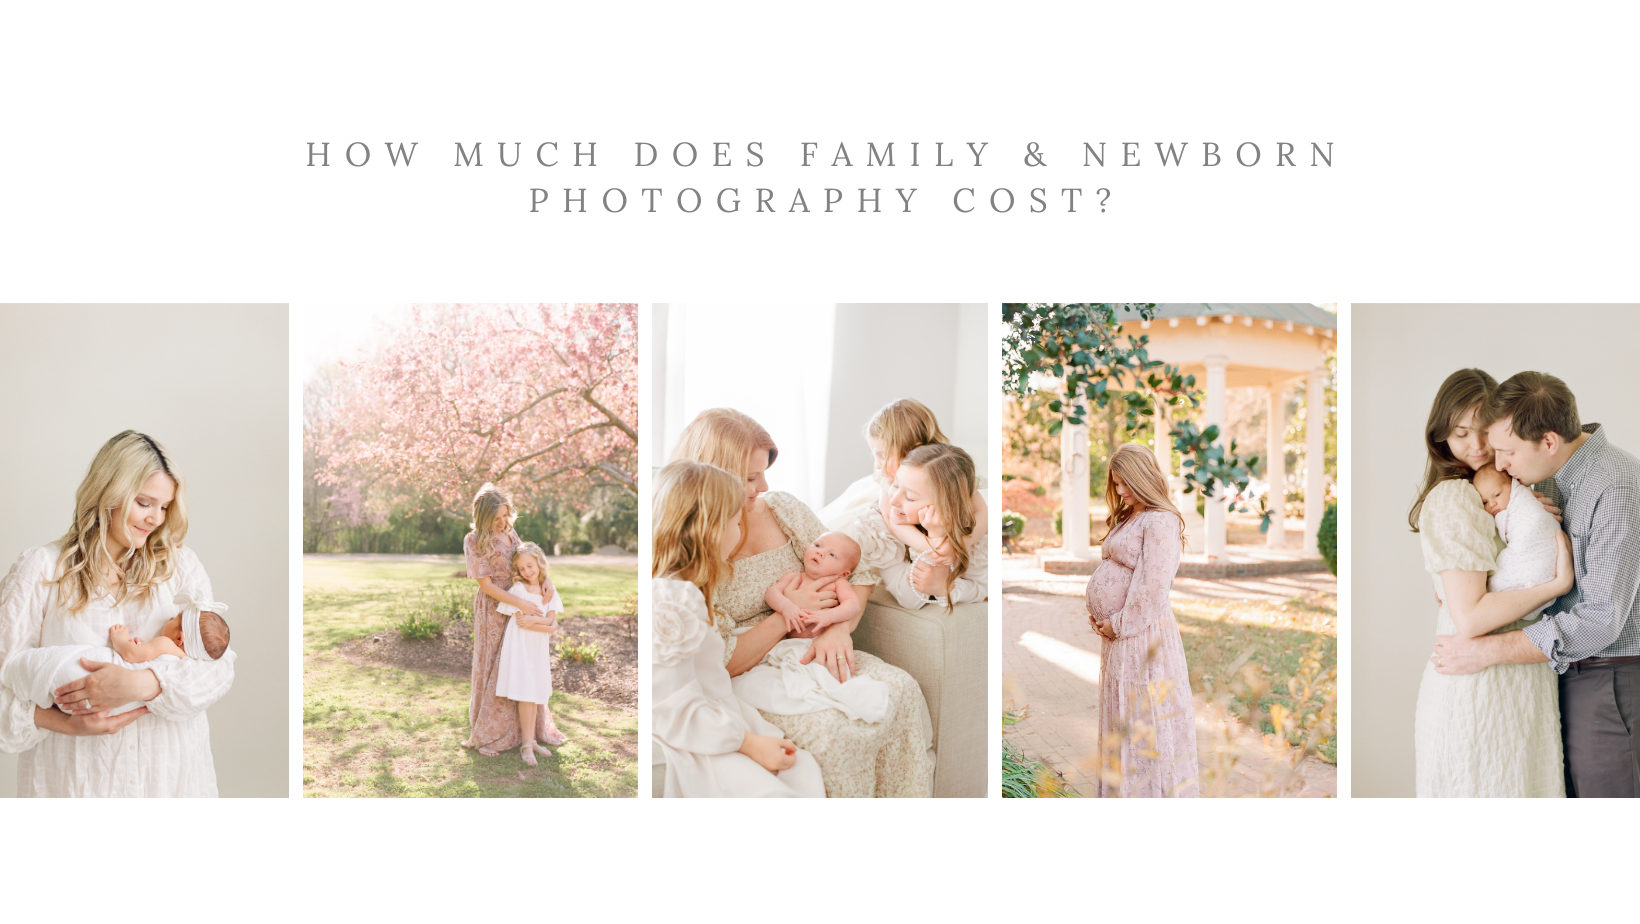 Collage of family and newborn photography images in an article about how much photography costs.